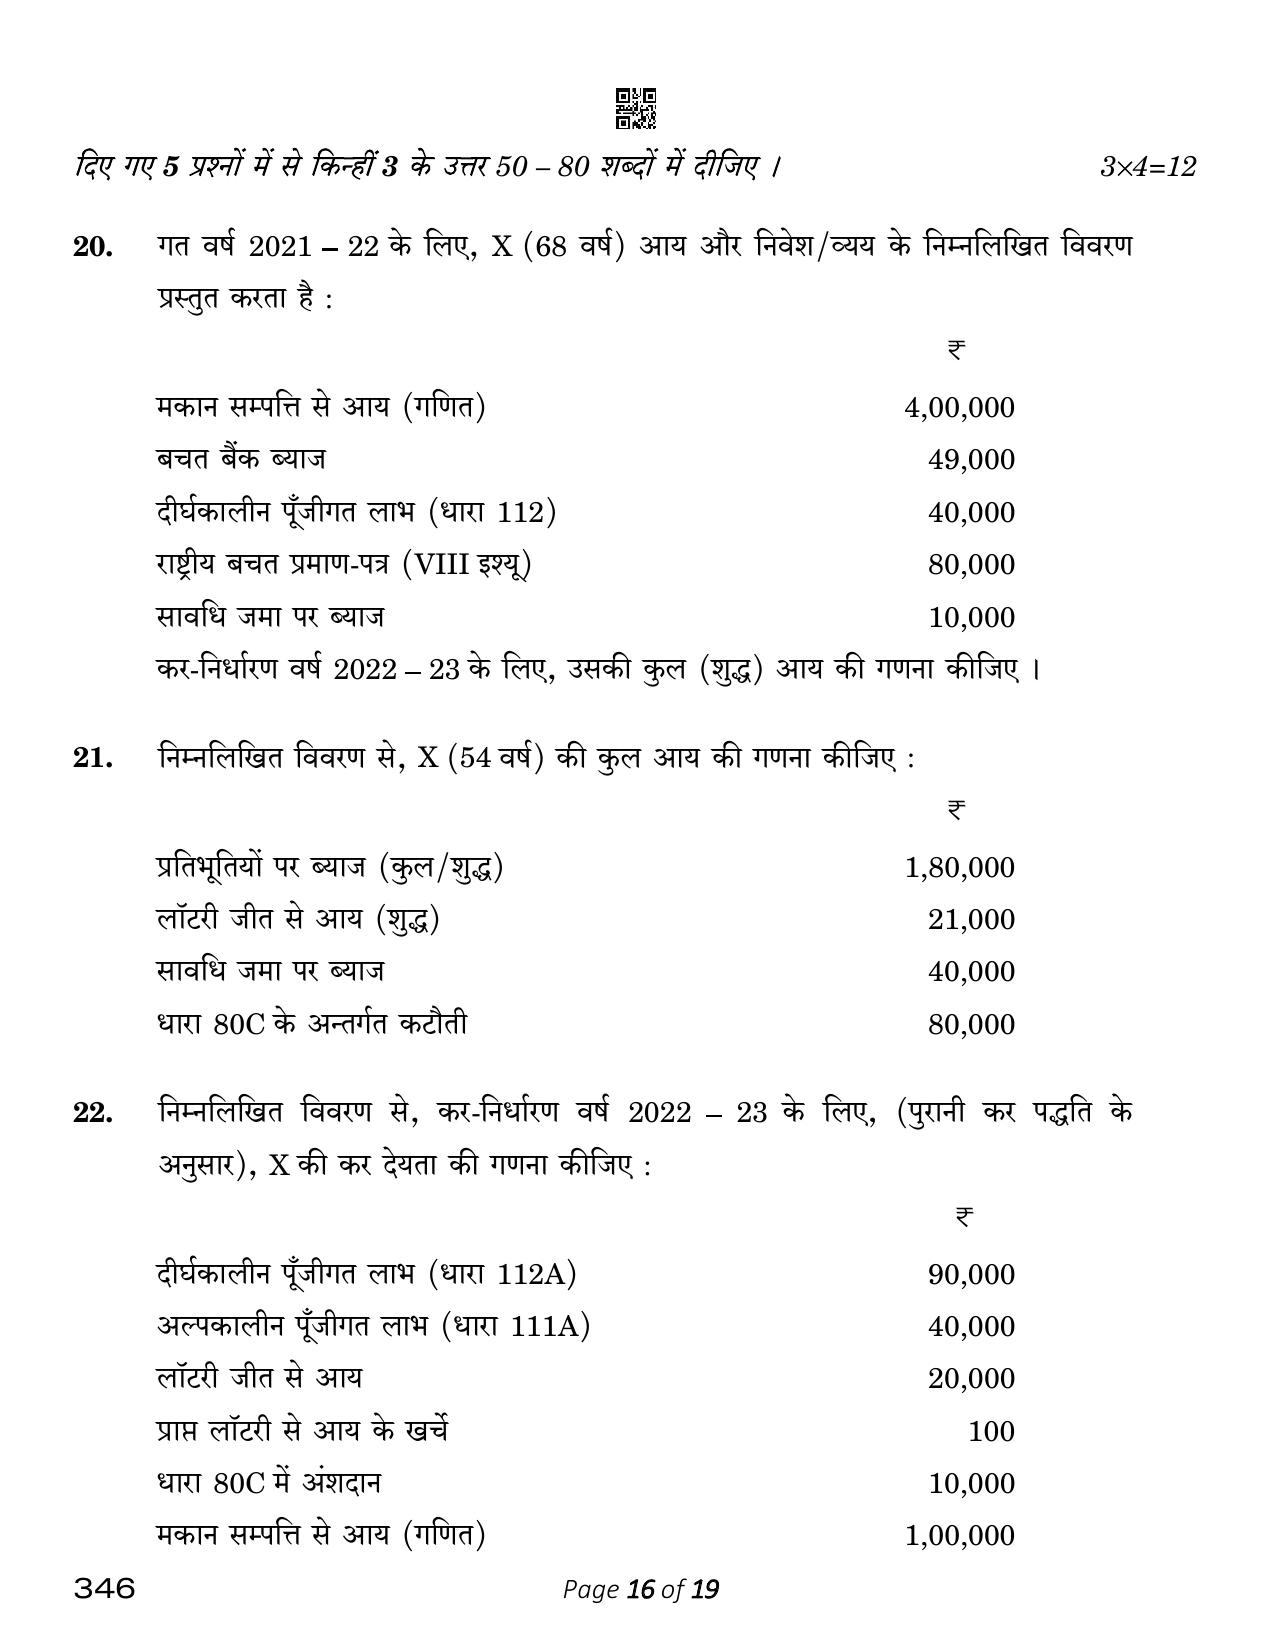 CBSE Class 12 Taxation (Compartment) 2023 Question Paper - Page 16